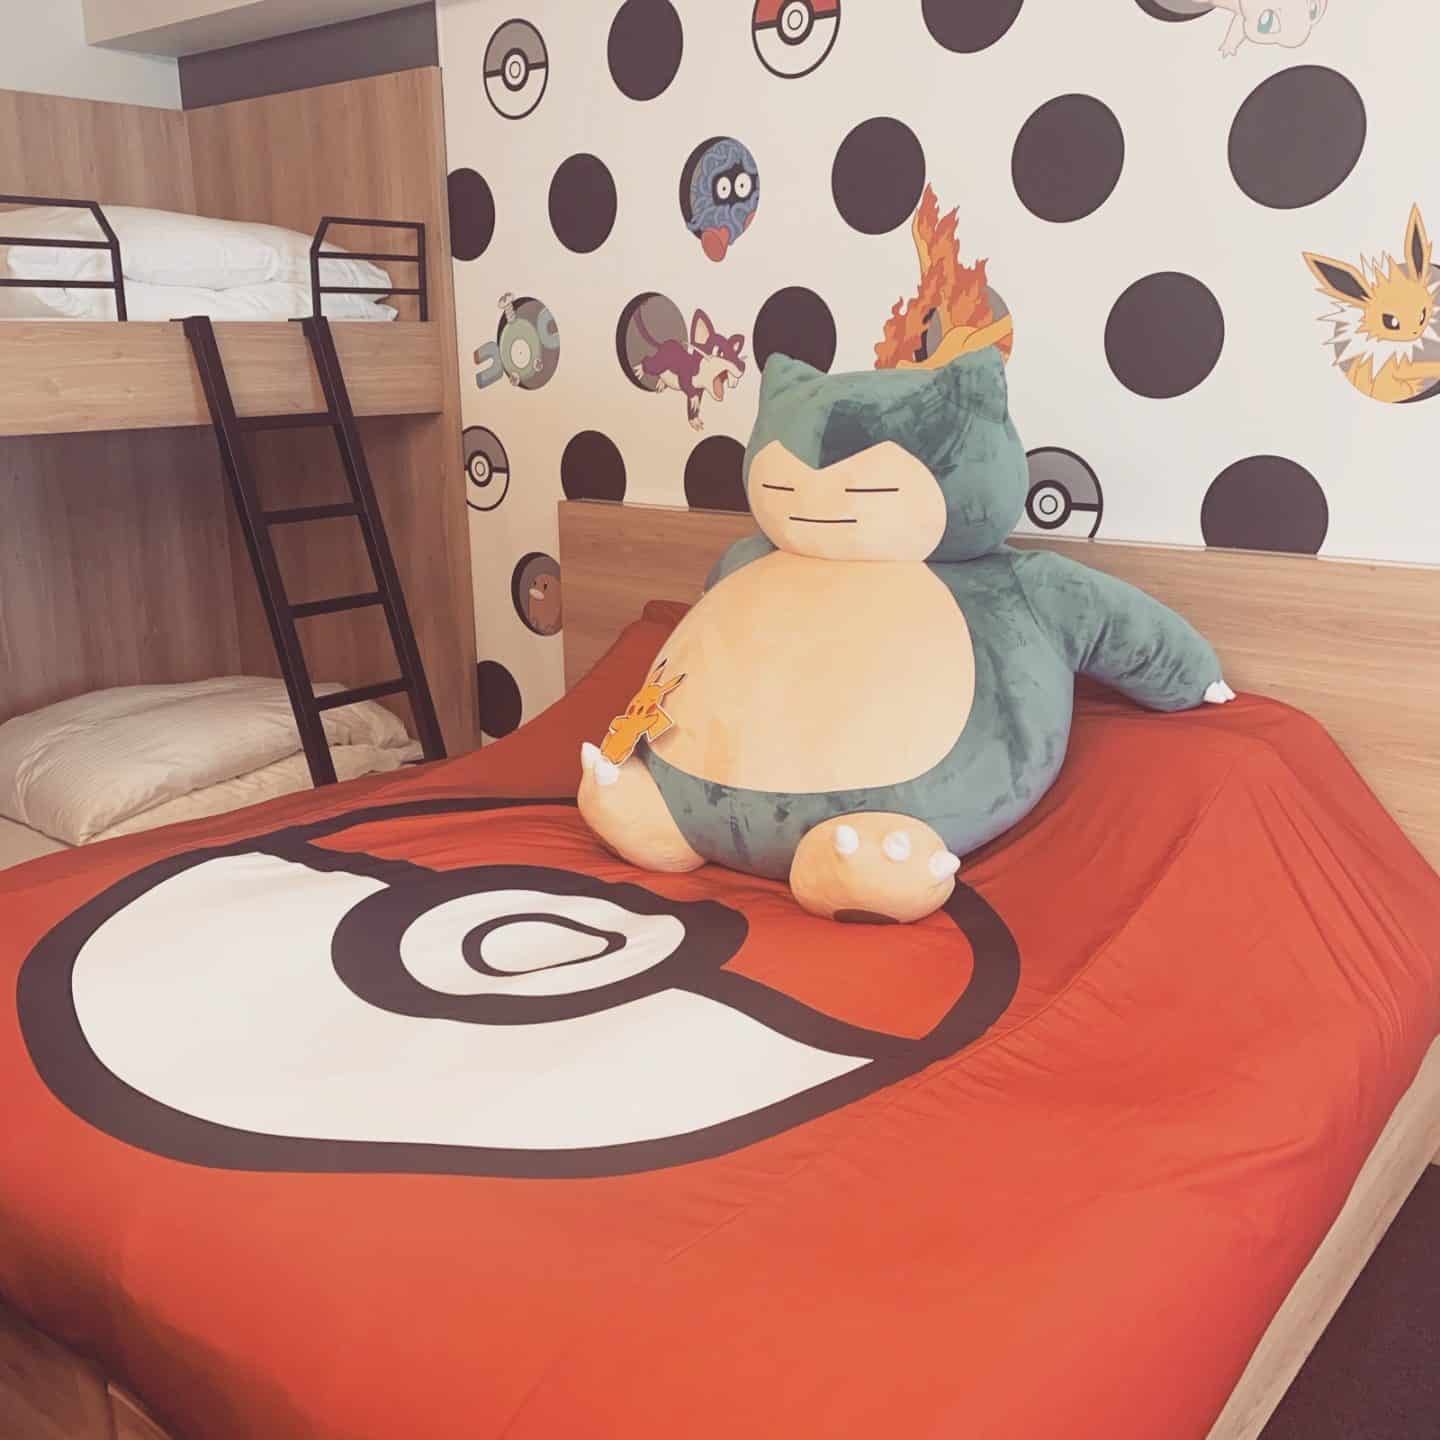 Pokemon Themed Rooms at Mimaru : Accommodation in Japan for families